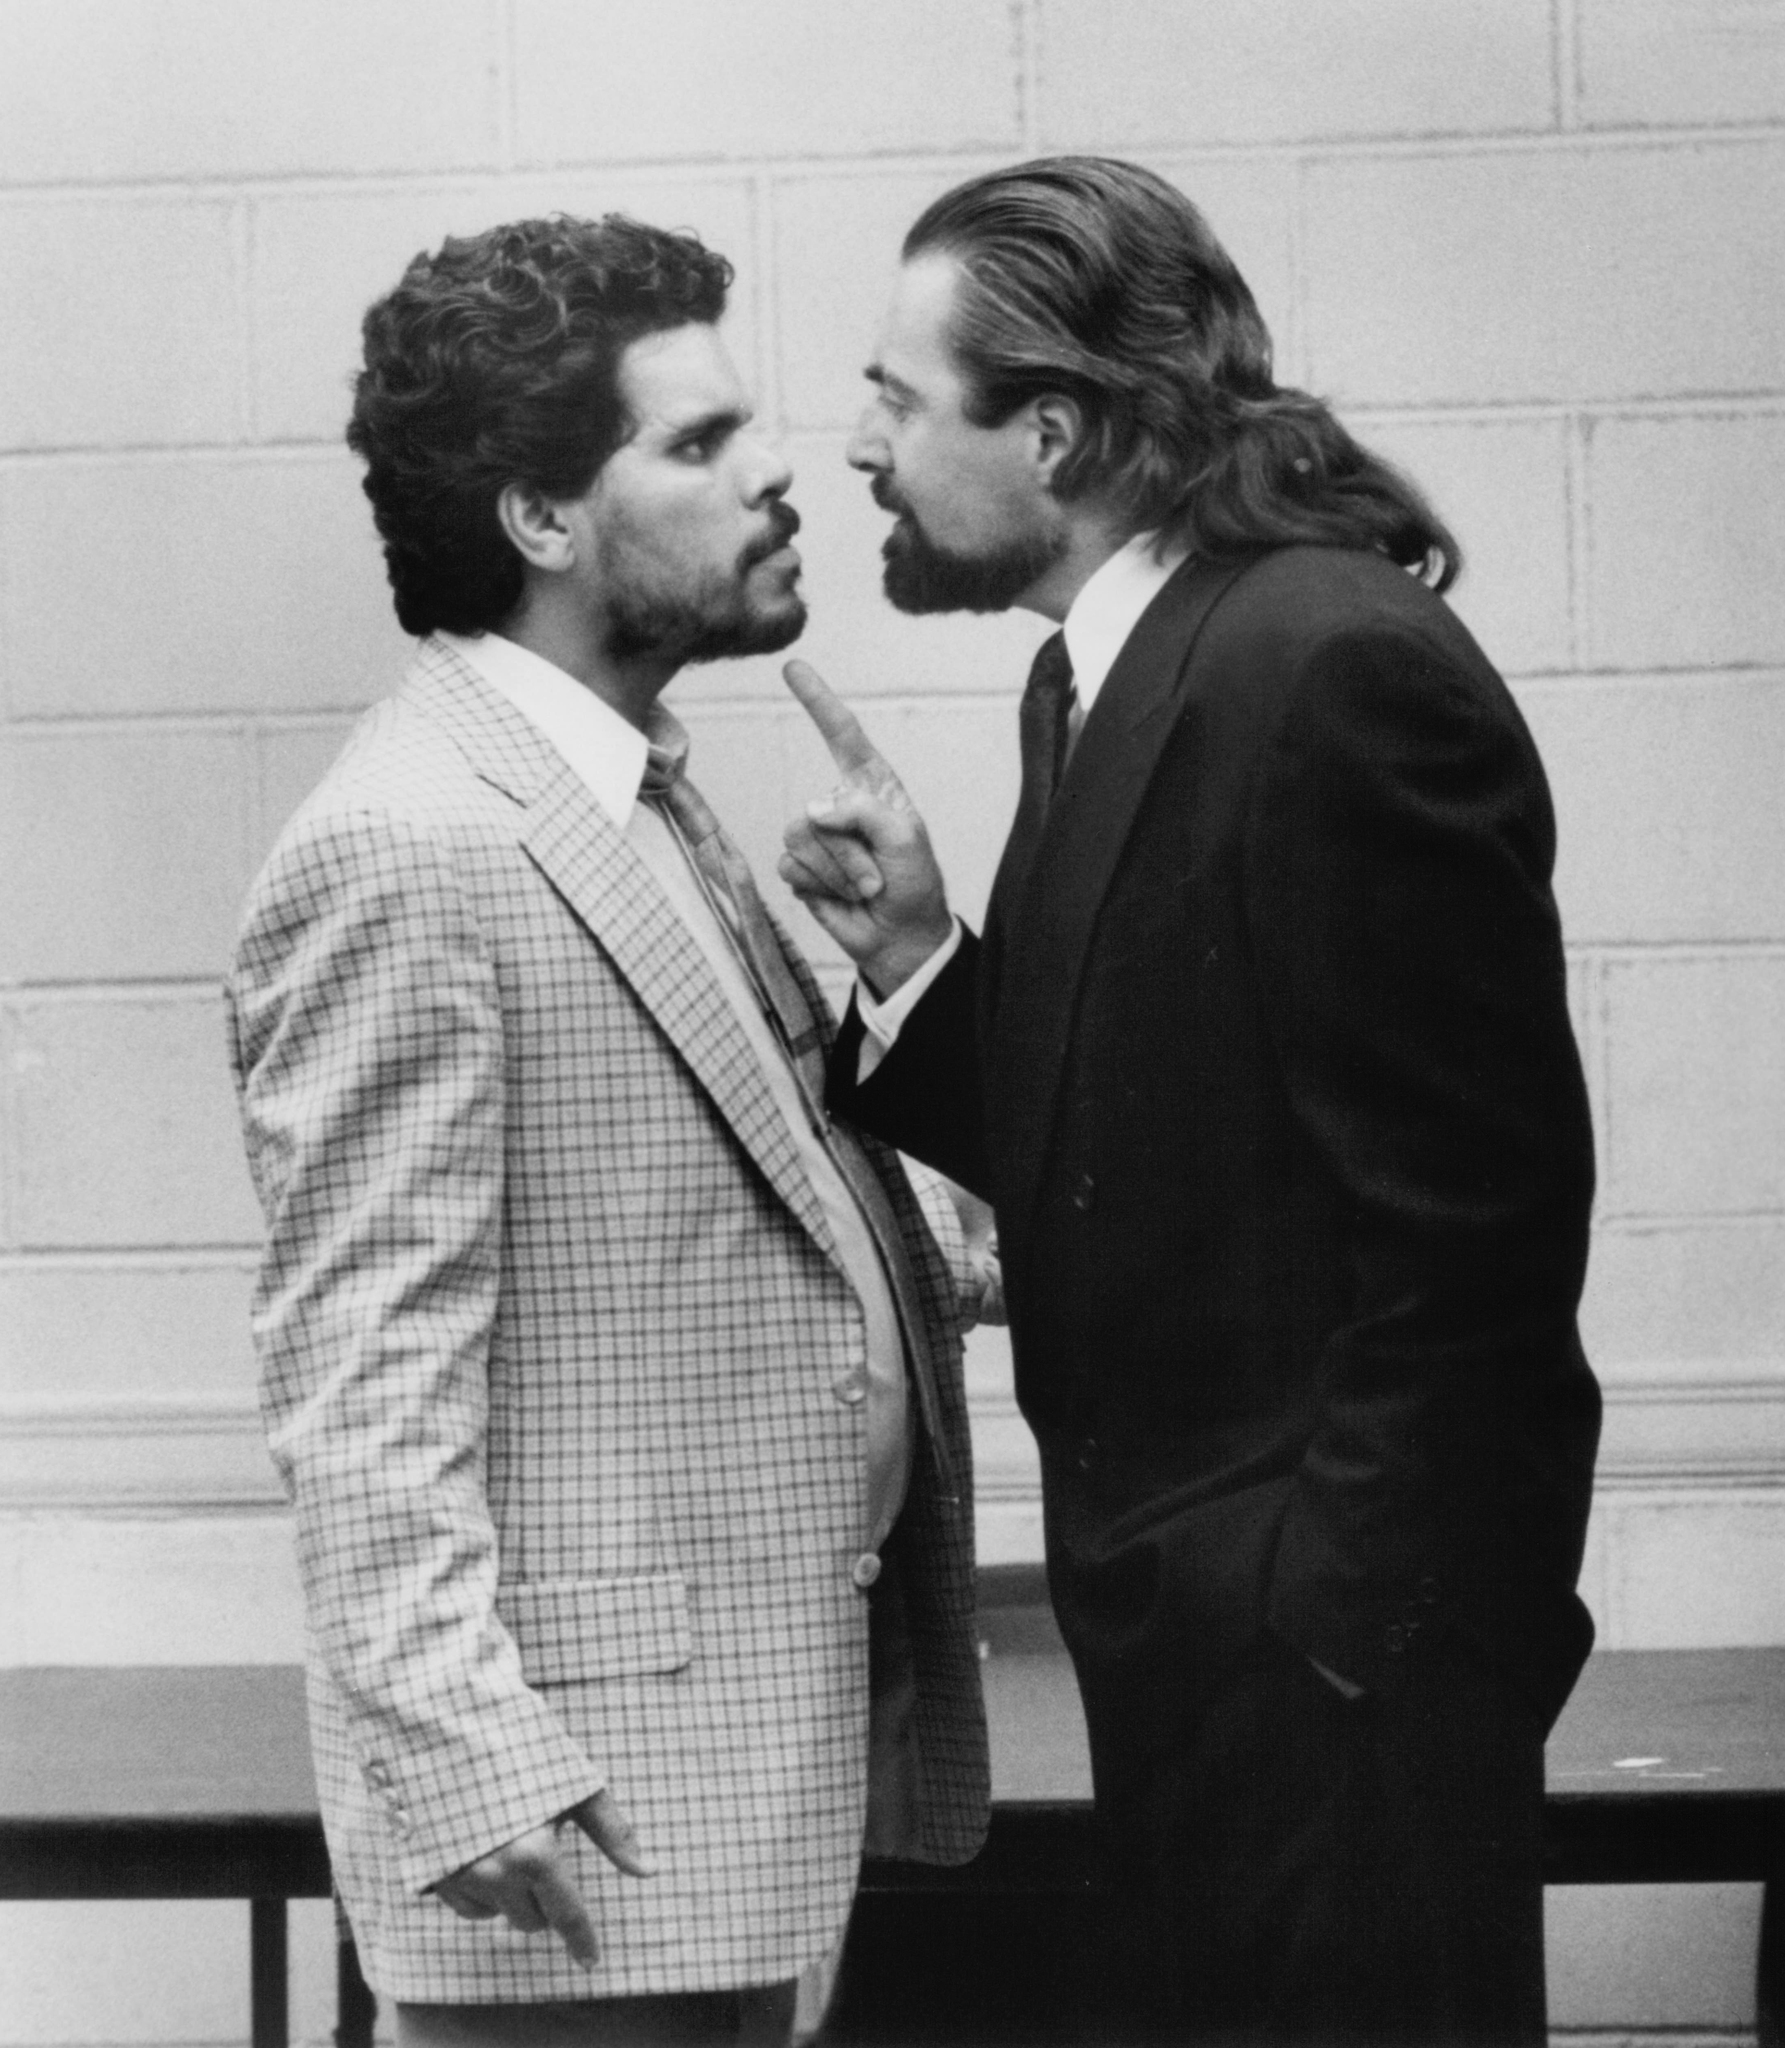 Still of Armand Assante and Luis Guzmán in Q & A (1990)